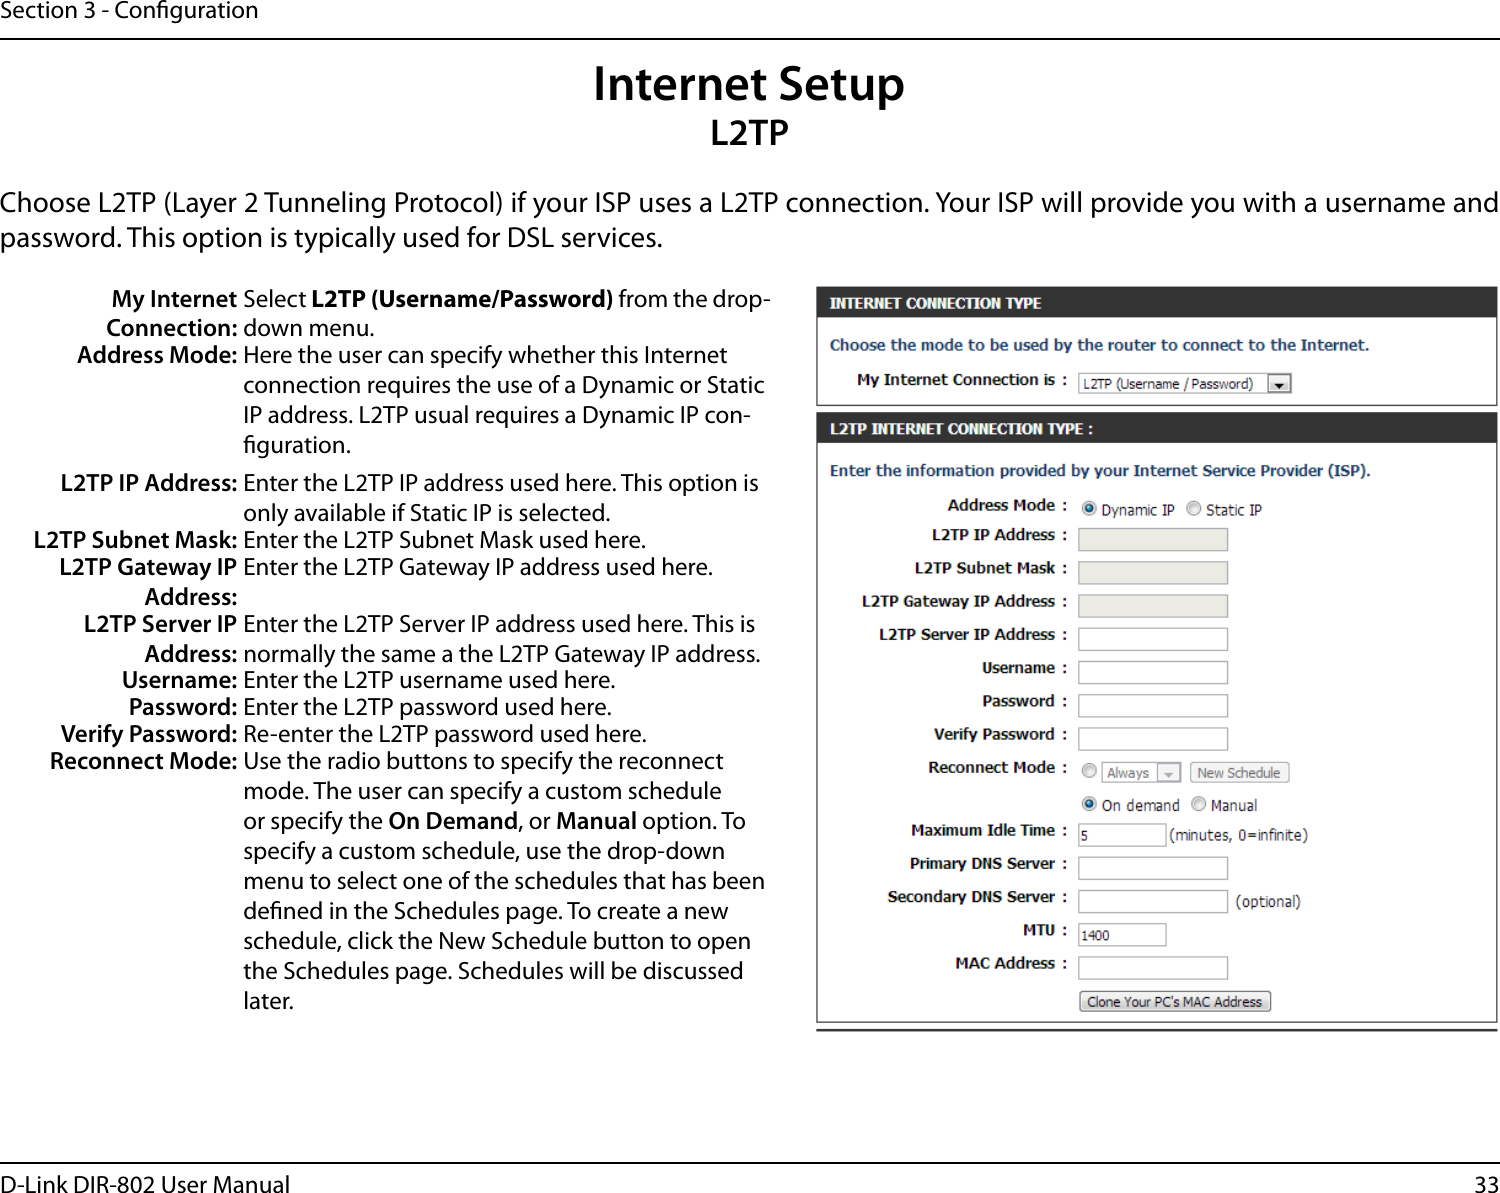 33D-Link DIR-802 User ManualSection 3 - CongurationInternet SetupL2TPChoose L2TP (Layer 2 Tunneling Protocol) if your ISP uses a L2TP connection. Your ISP will provide you with a username and password. This option is typically used for DSL services. My Internet Connection:Select L2TP (Username/Password) from the drop-down menu.Address Mode: Here the user can specify whether this Internet connection requires the use of a Dynamic or Static IP address. L2TP usual requires a Dynamic IP con-guration.L2TP IP Address: Enter the L2TP IP address used here. This option is only available if Static IP is selected.L2TP Subnet Mask: Enter the L2TP Subnet Mask used here.L2TP Gateway IP Address:Enter the L2TP Gateway IP address used here.L2TP Server IP Address:Enter the L2TP Server IP address used here. This is normally the same a the L2TP Gateway IP address.Username: Enter the L2TP username used here.Password: Enter the L2TP password used here.Verify Password: Re-enter the L2TP password used here.Reconnect Mode: Use the radio buttons to specify the reconnect mode. The user can specify a custom schedule or specify the On Demand, or Manual option. To specify a custom schedule, use the drop-down menu to select one of the schedules that has been dened in the Schedules page. To create a new schedule, click the New Schedule button to open the Schedules page. Schedules will be discussed later.